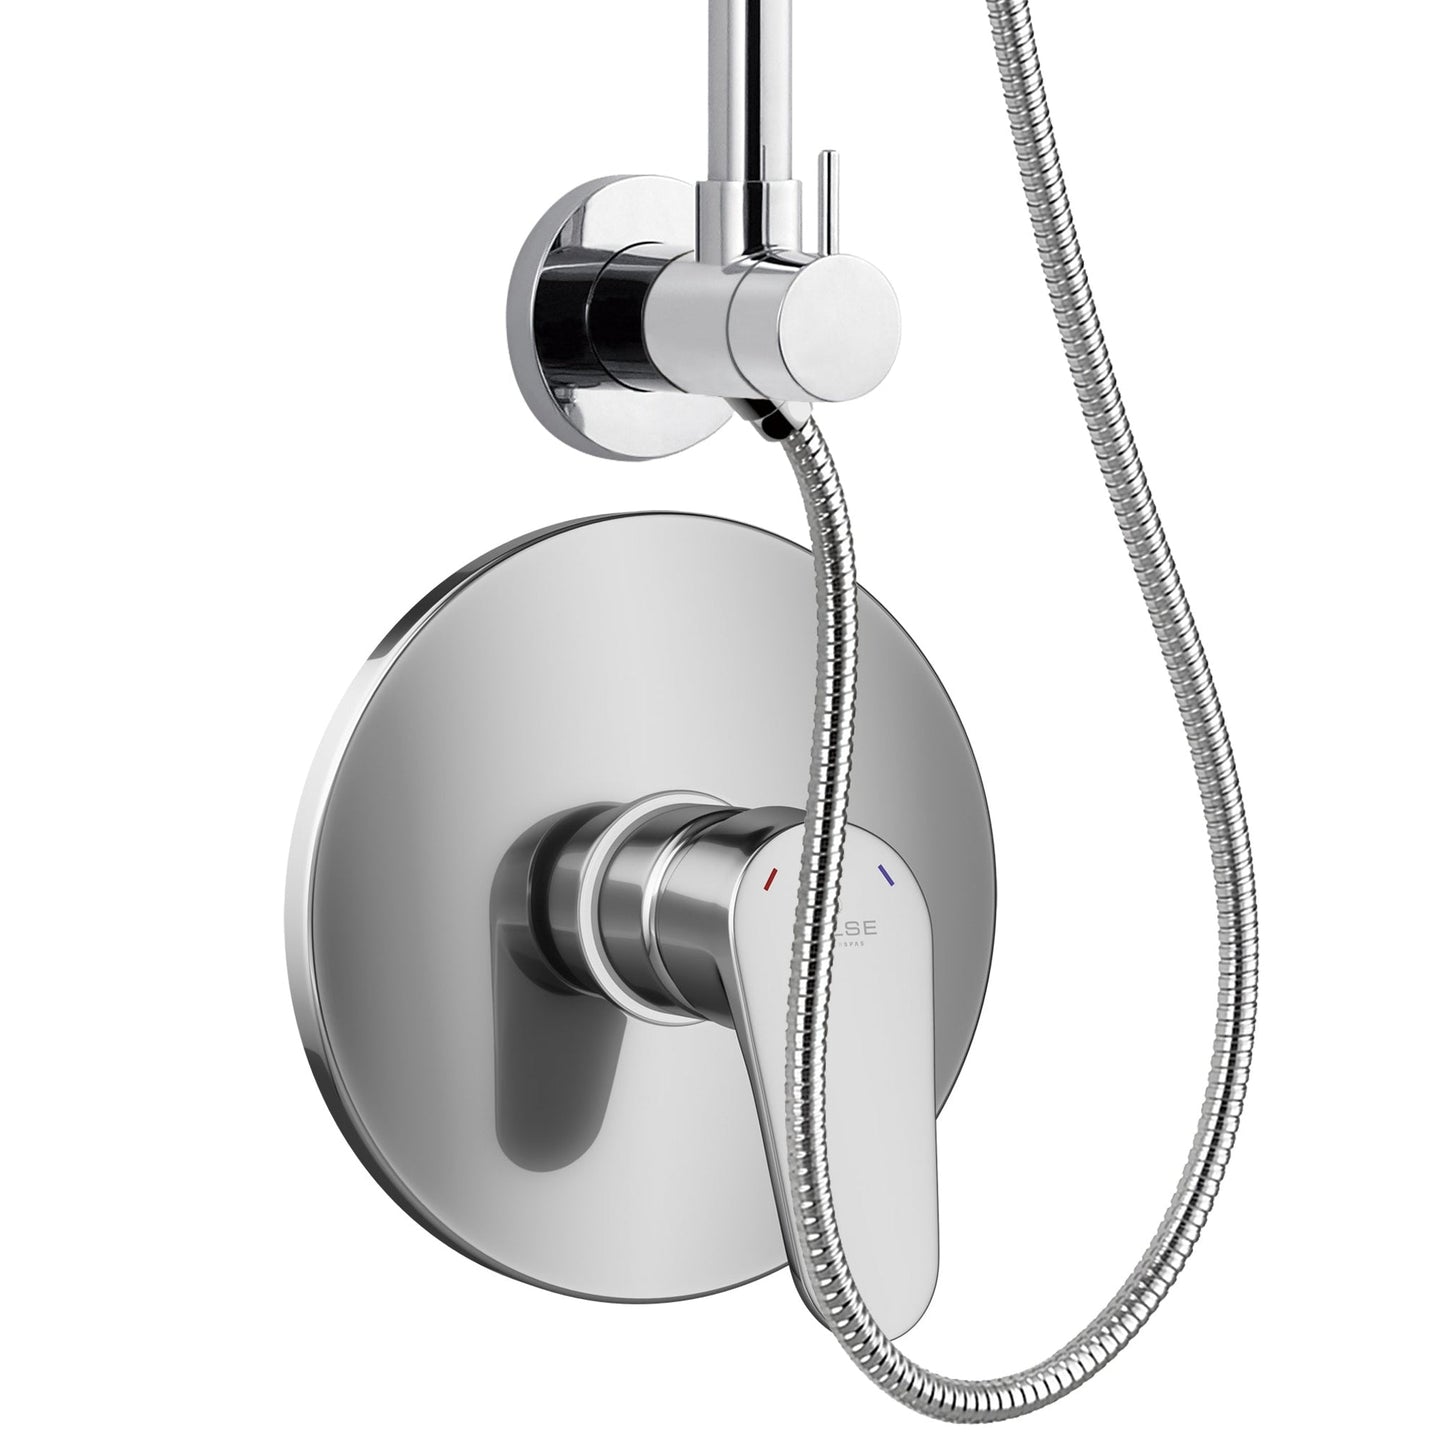 PULSE ShowerSpas SeaBreeze II 2.5 GPM Rain Shower System and Valve Combo in Chrome Finish With 3-Function Hand Shower